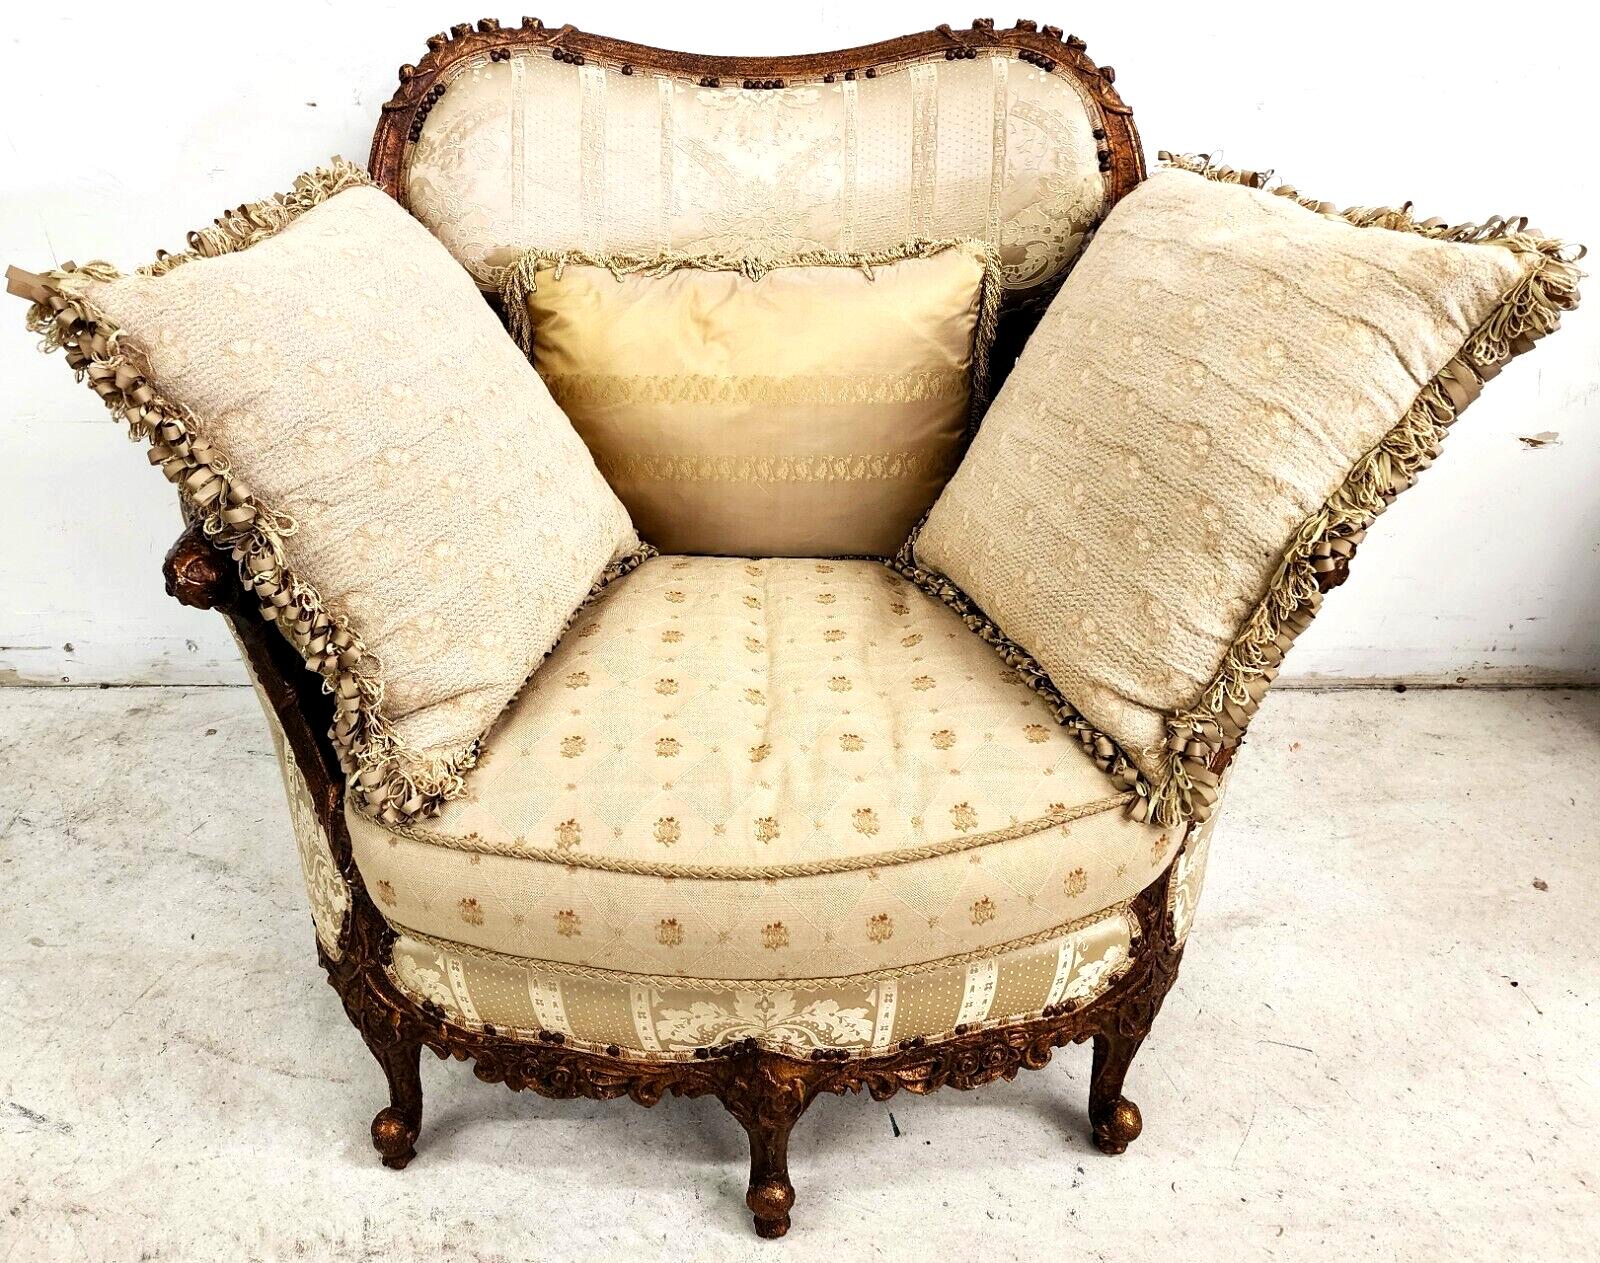 Offering One Of Our Recent Palm Beach Estate Fine Furniture Acquisitions Of A 
Really Stunning Vintage Armchair Carved Gilded Walnut by CAROL HICKS BOLTON for EJ VICTOR
With the original matching throw pillows from Carol Hicks Bolton

Wonderful